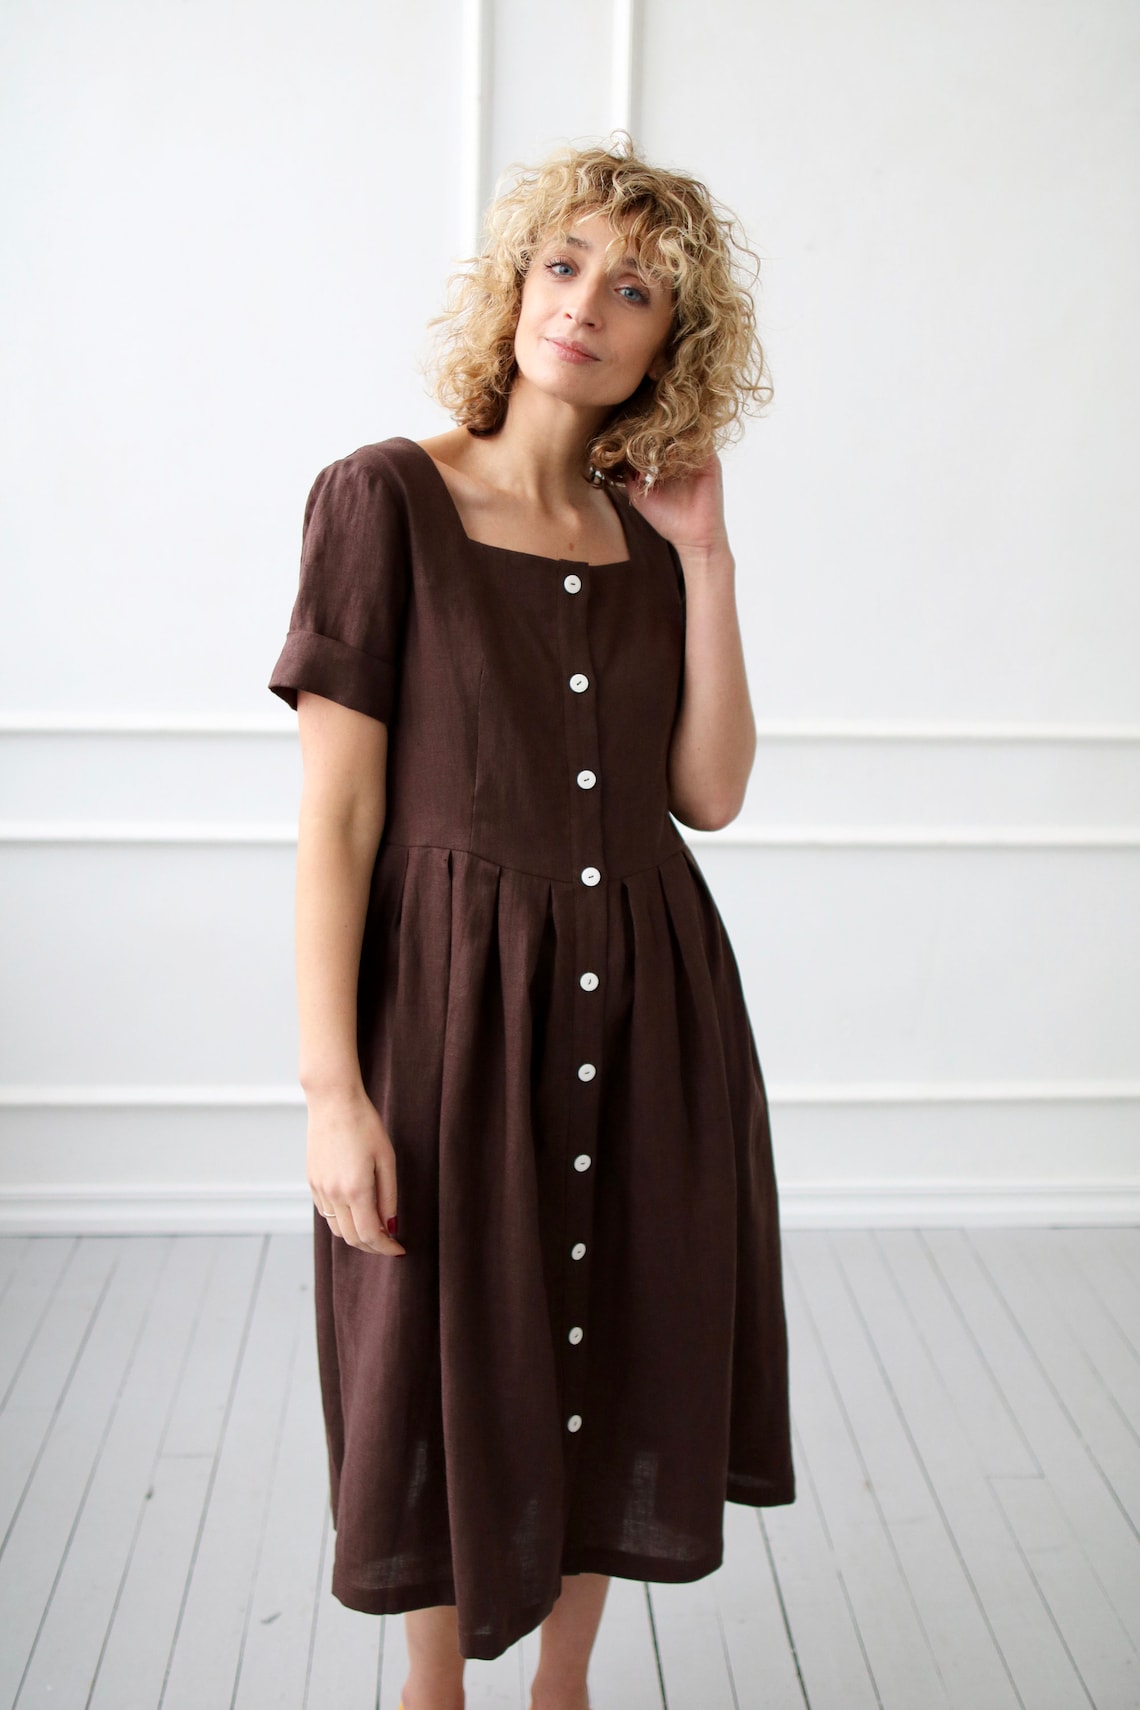 Linen dress in chocolate brown color / OFFON Clothing | Etsy